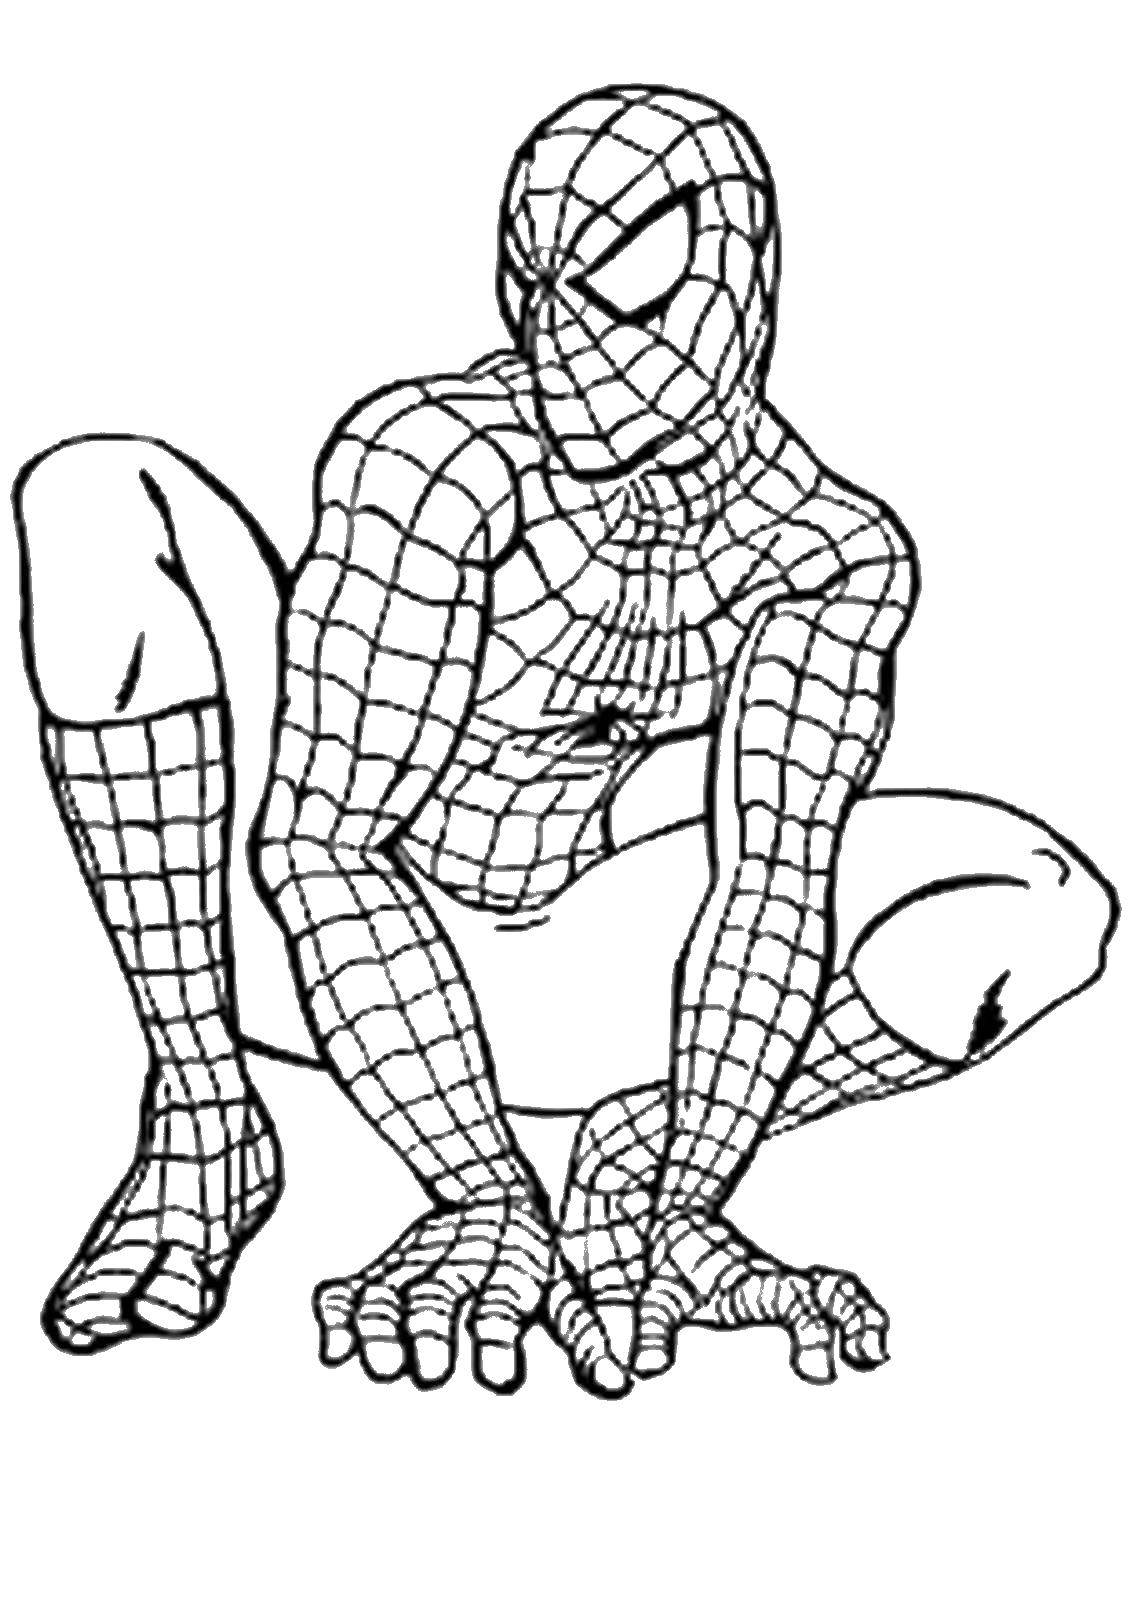 Coloring Spider-man. Category For boys . Tags:  cartoons for boys, Spiderman.